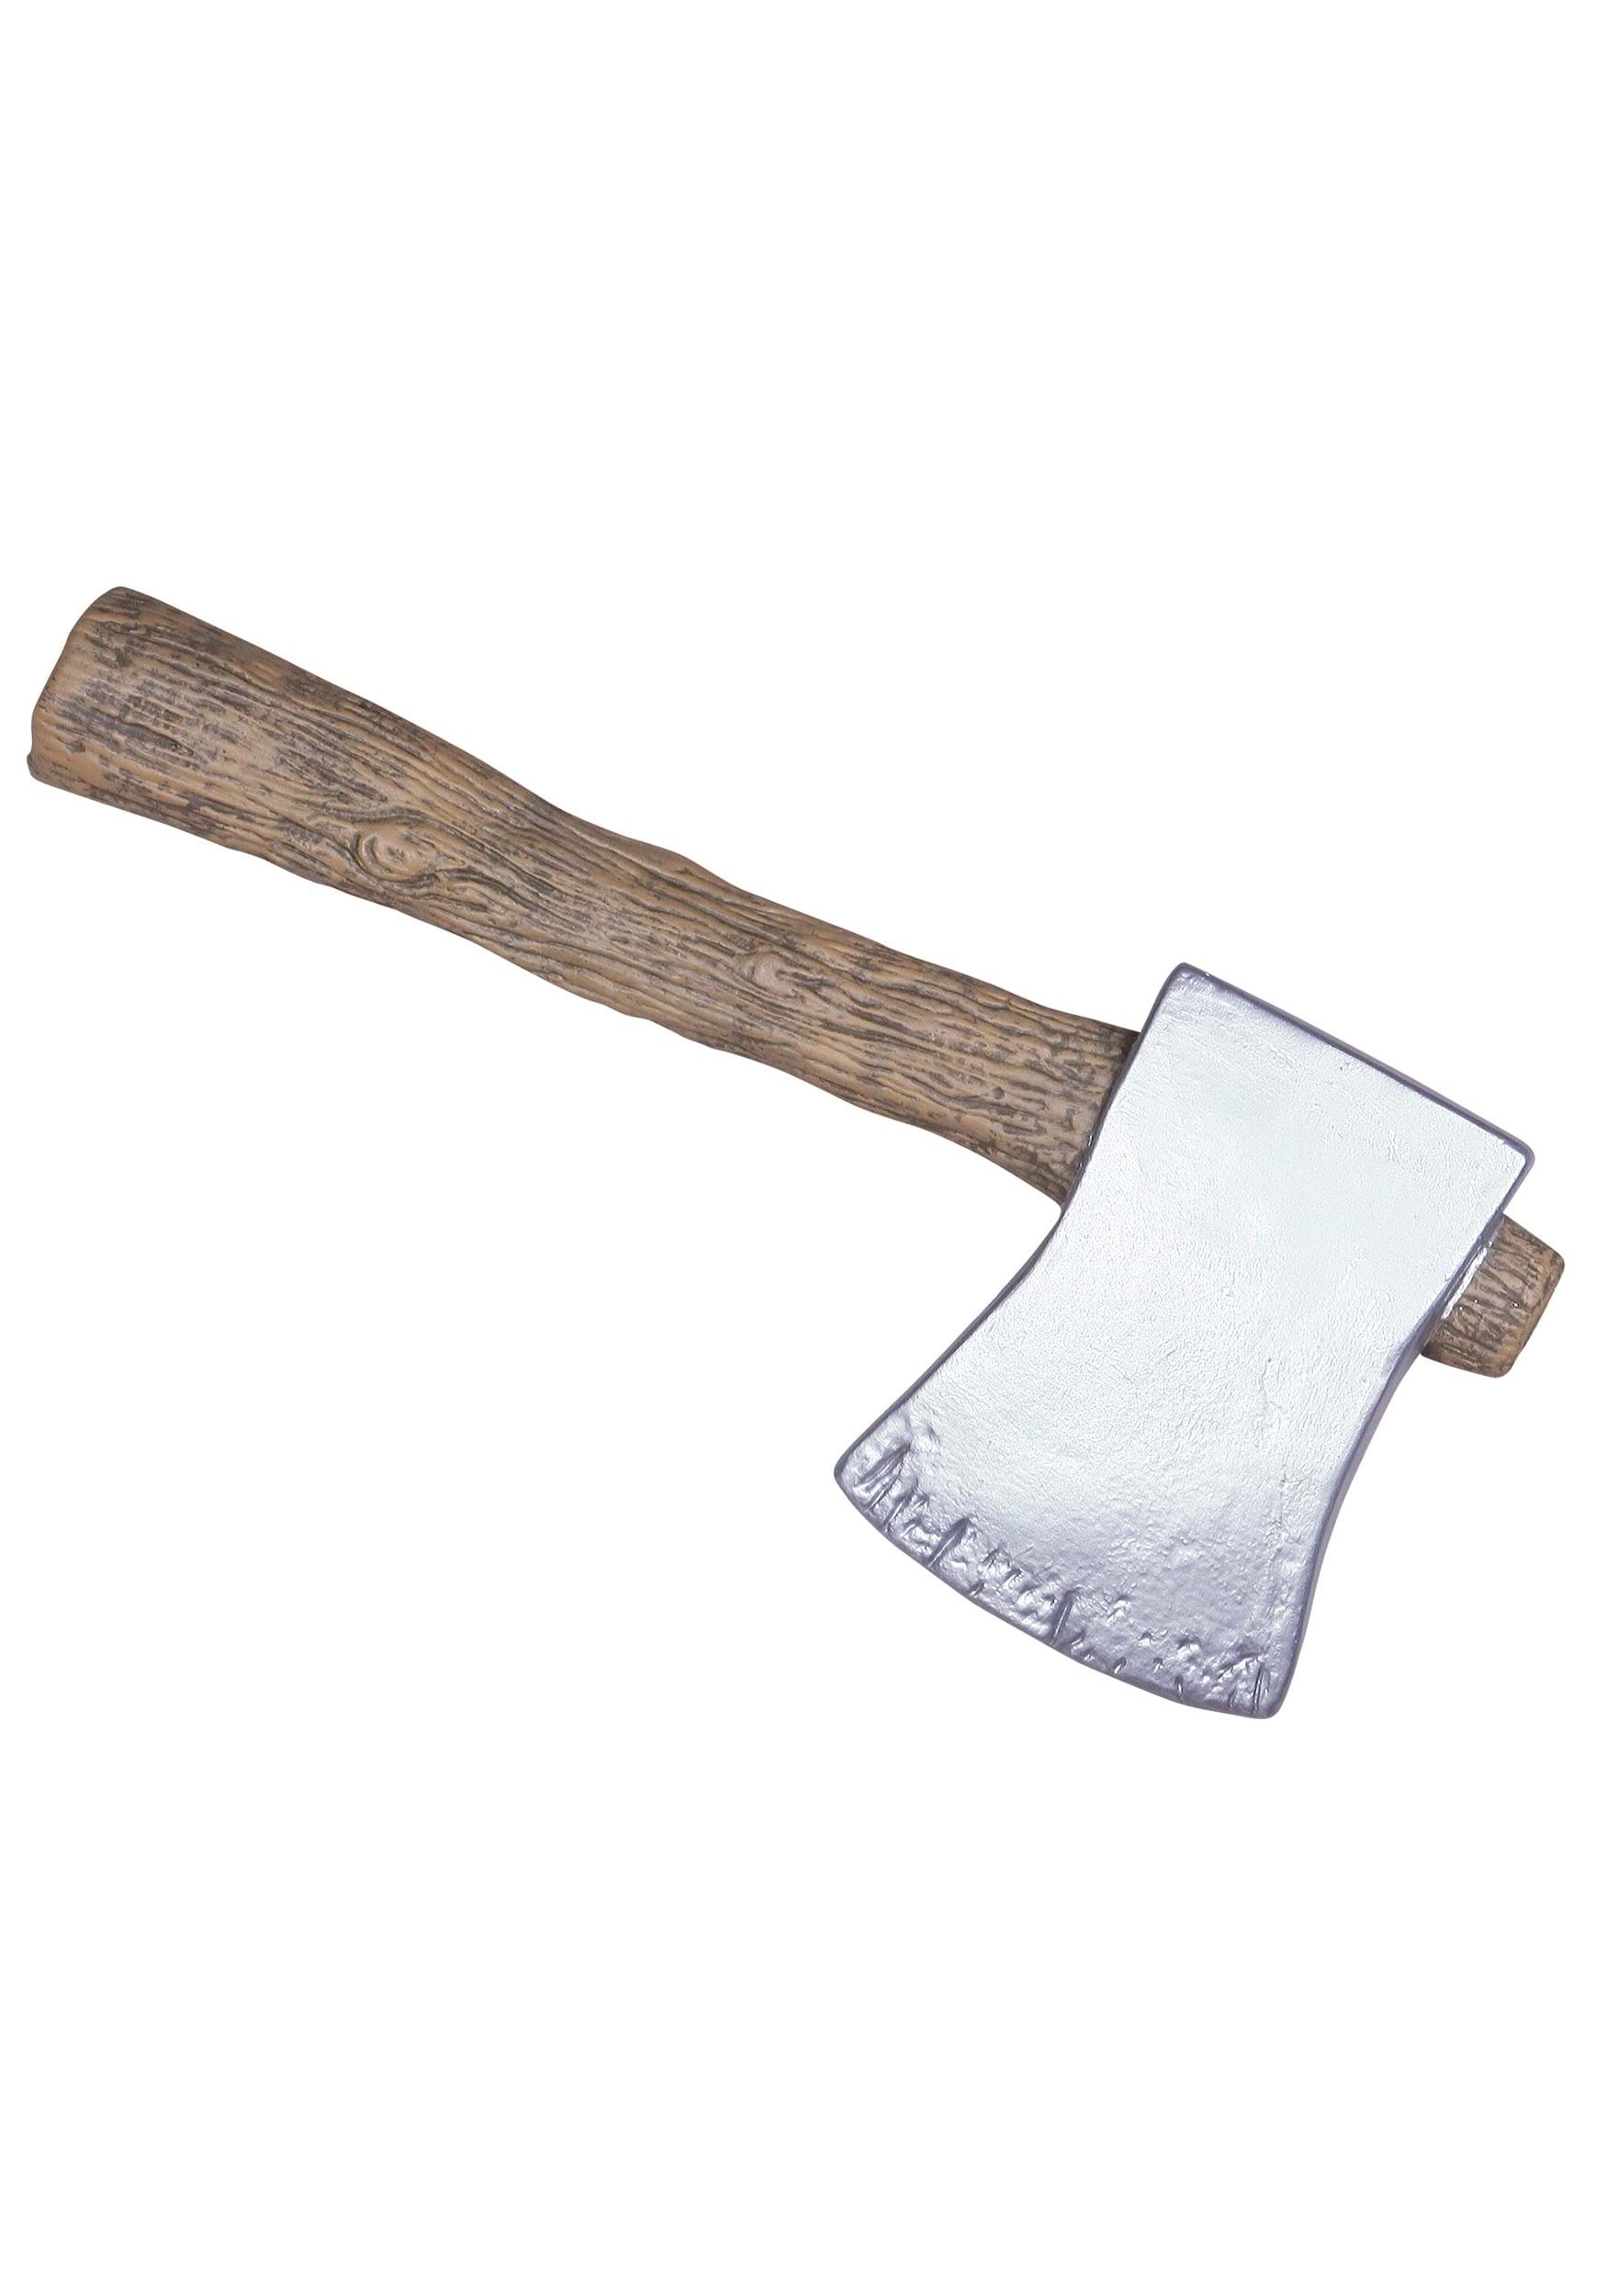 Hatchet Costume Accessory , Toy Weapon